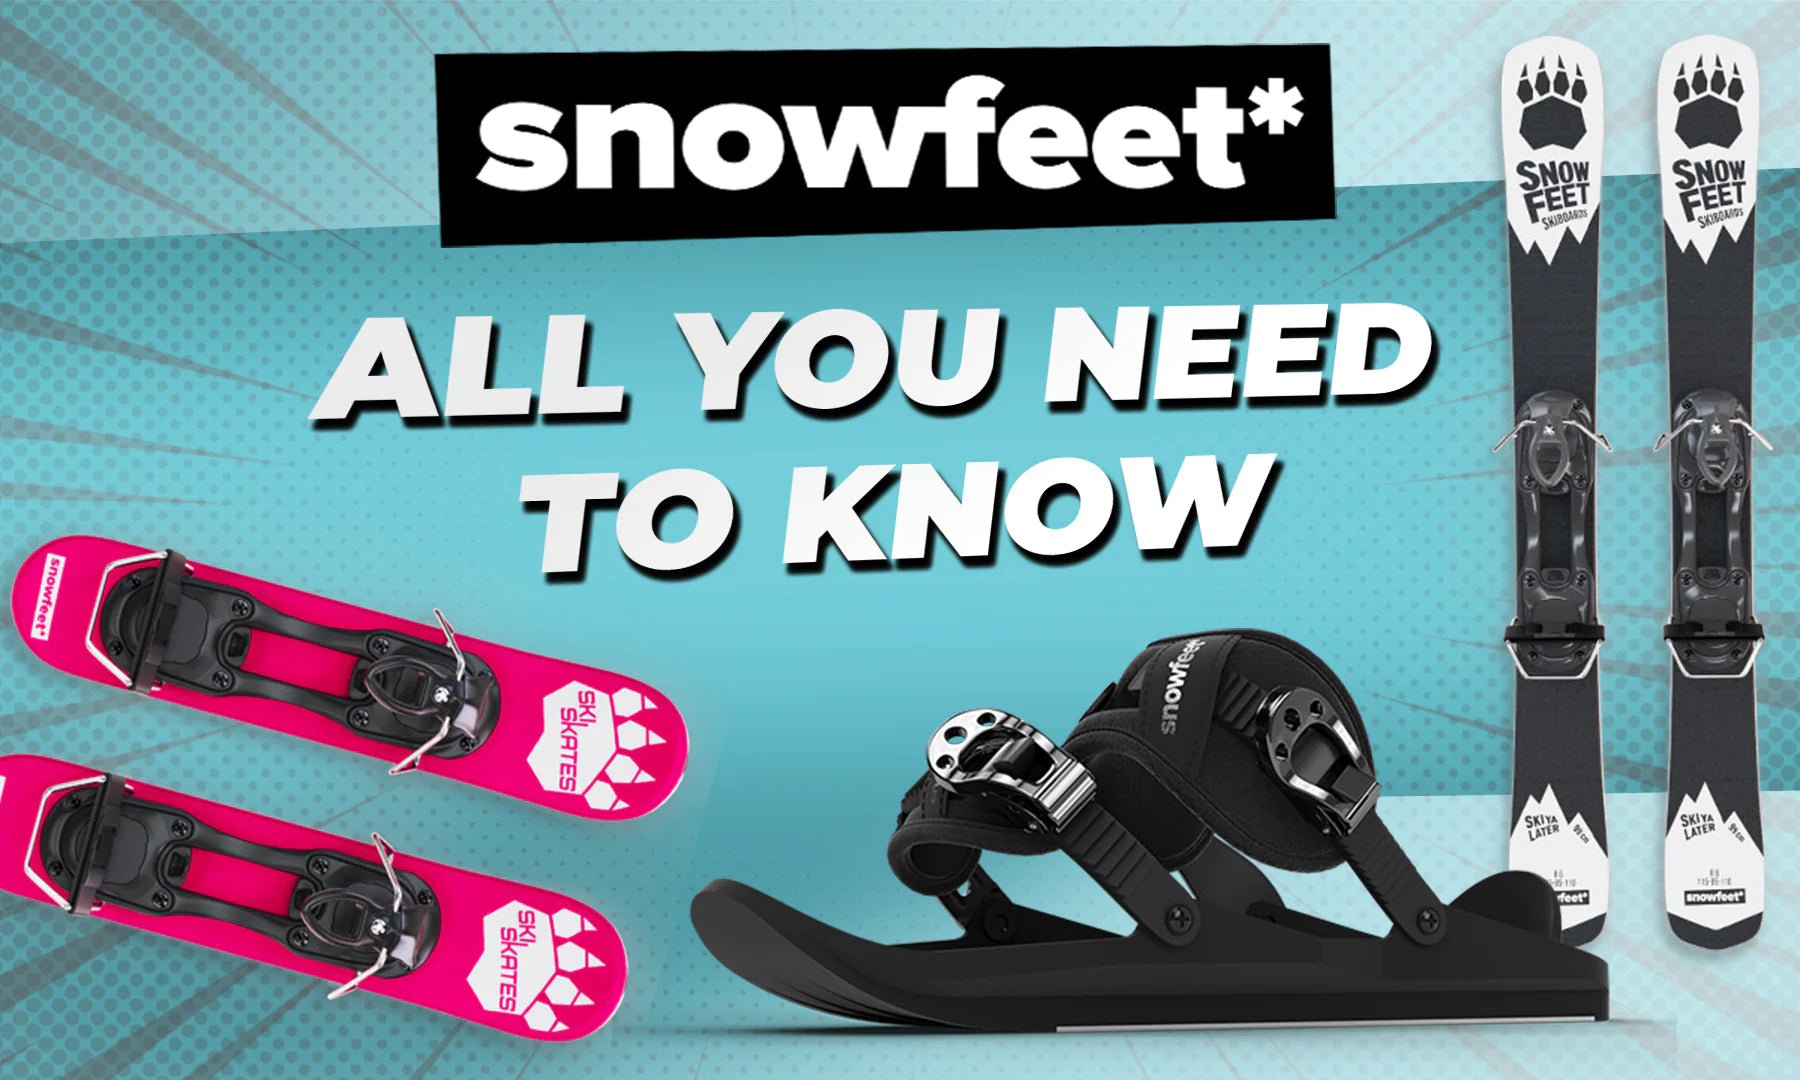 How to Choose the Right Skis? - Ultimate Guide - snowfeet*